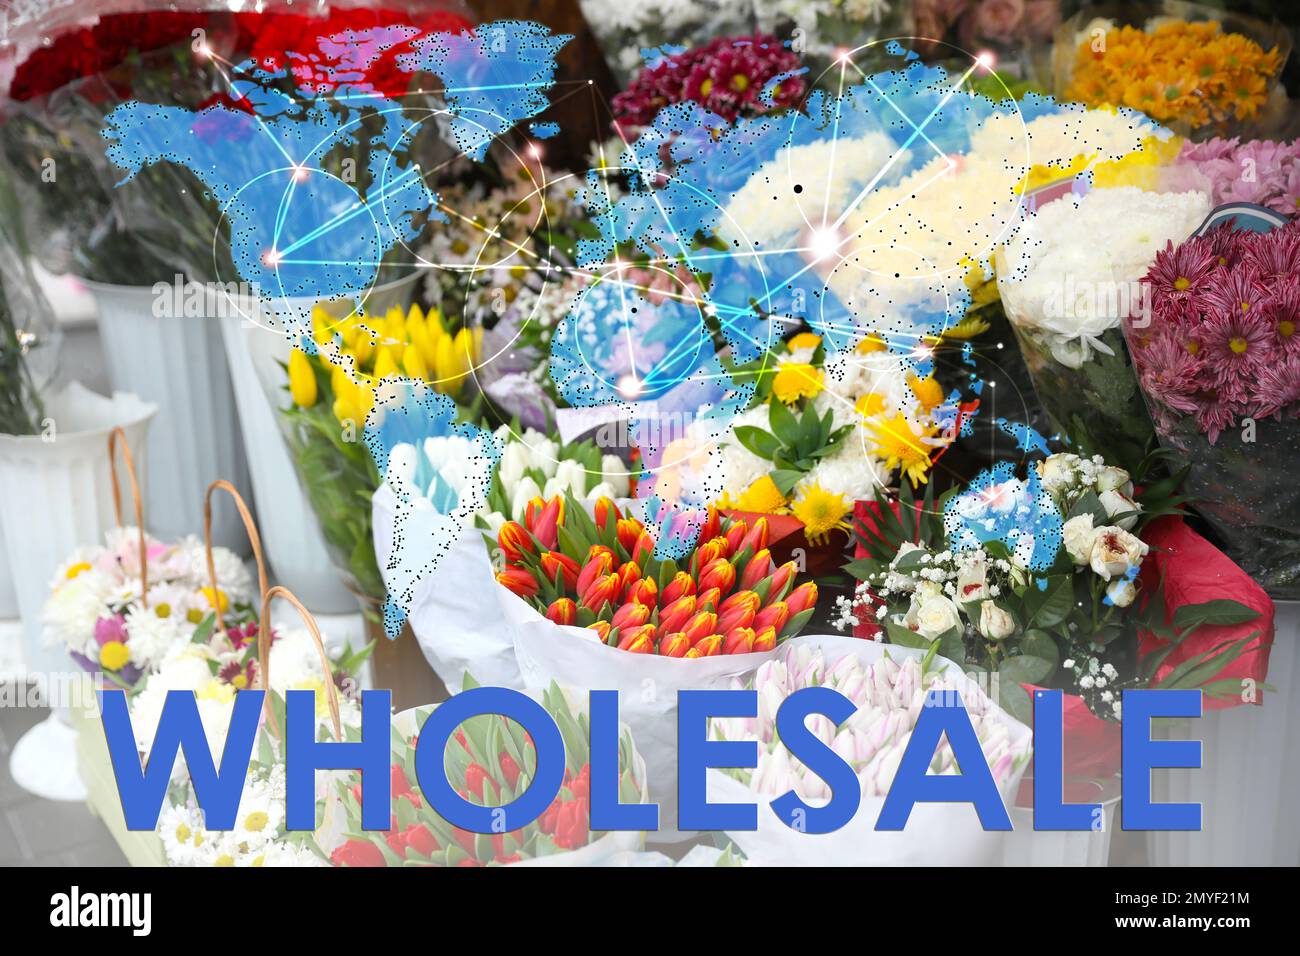 Wholesale business. World map and assortment of flowers on background Stock Photo